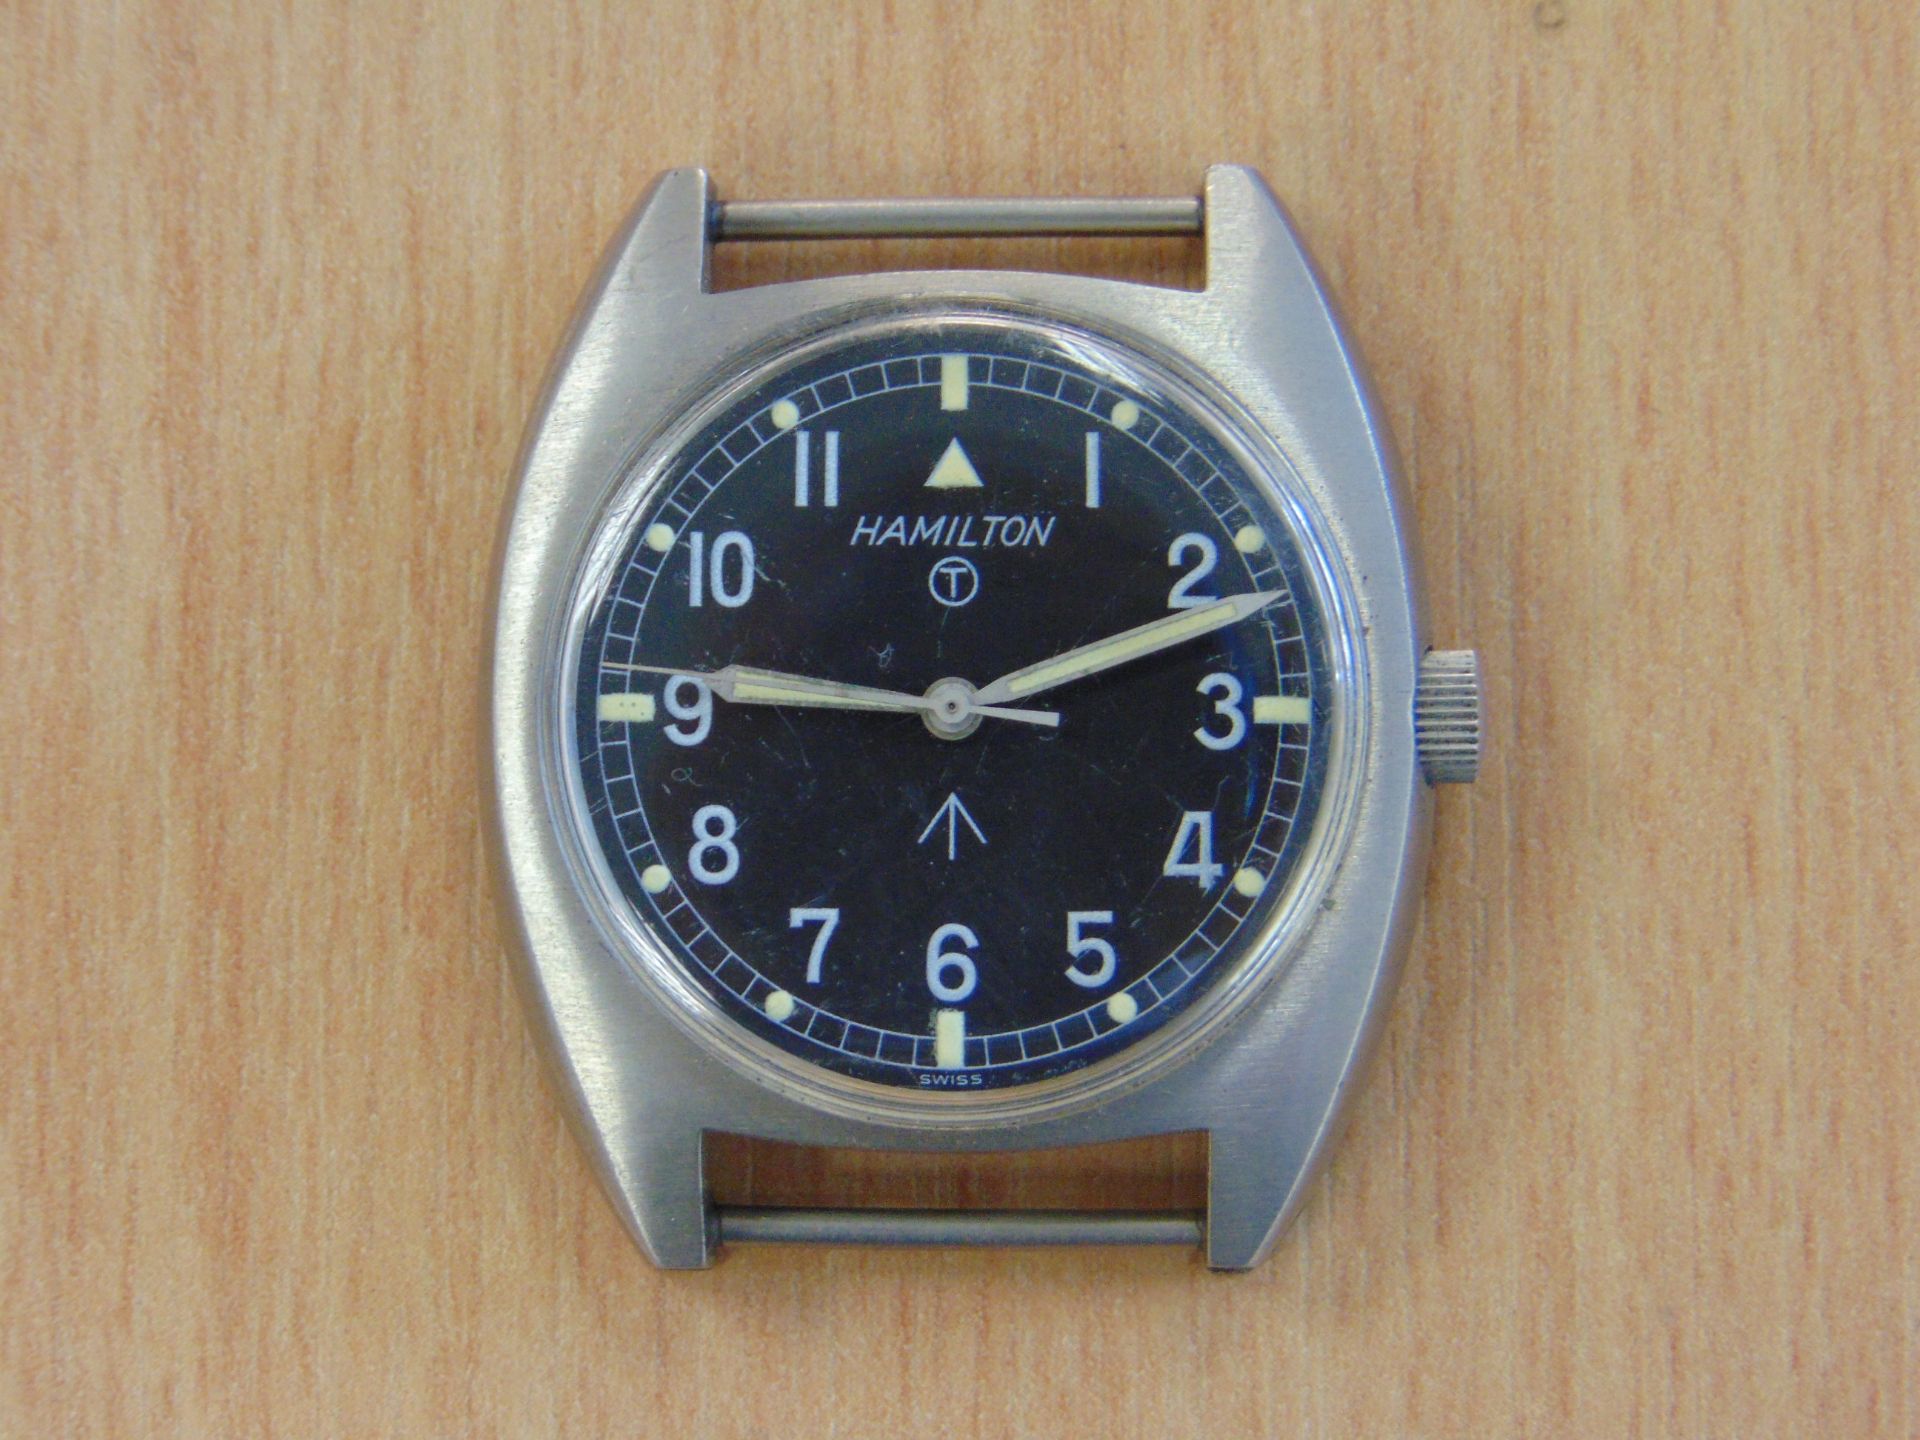 V.V. RARE UNISSUED HAMITON WIND UP W10 SERVICE WATCH NATO MARKINGS DATED 1973 - Image 4 of 8